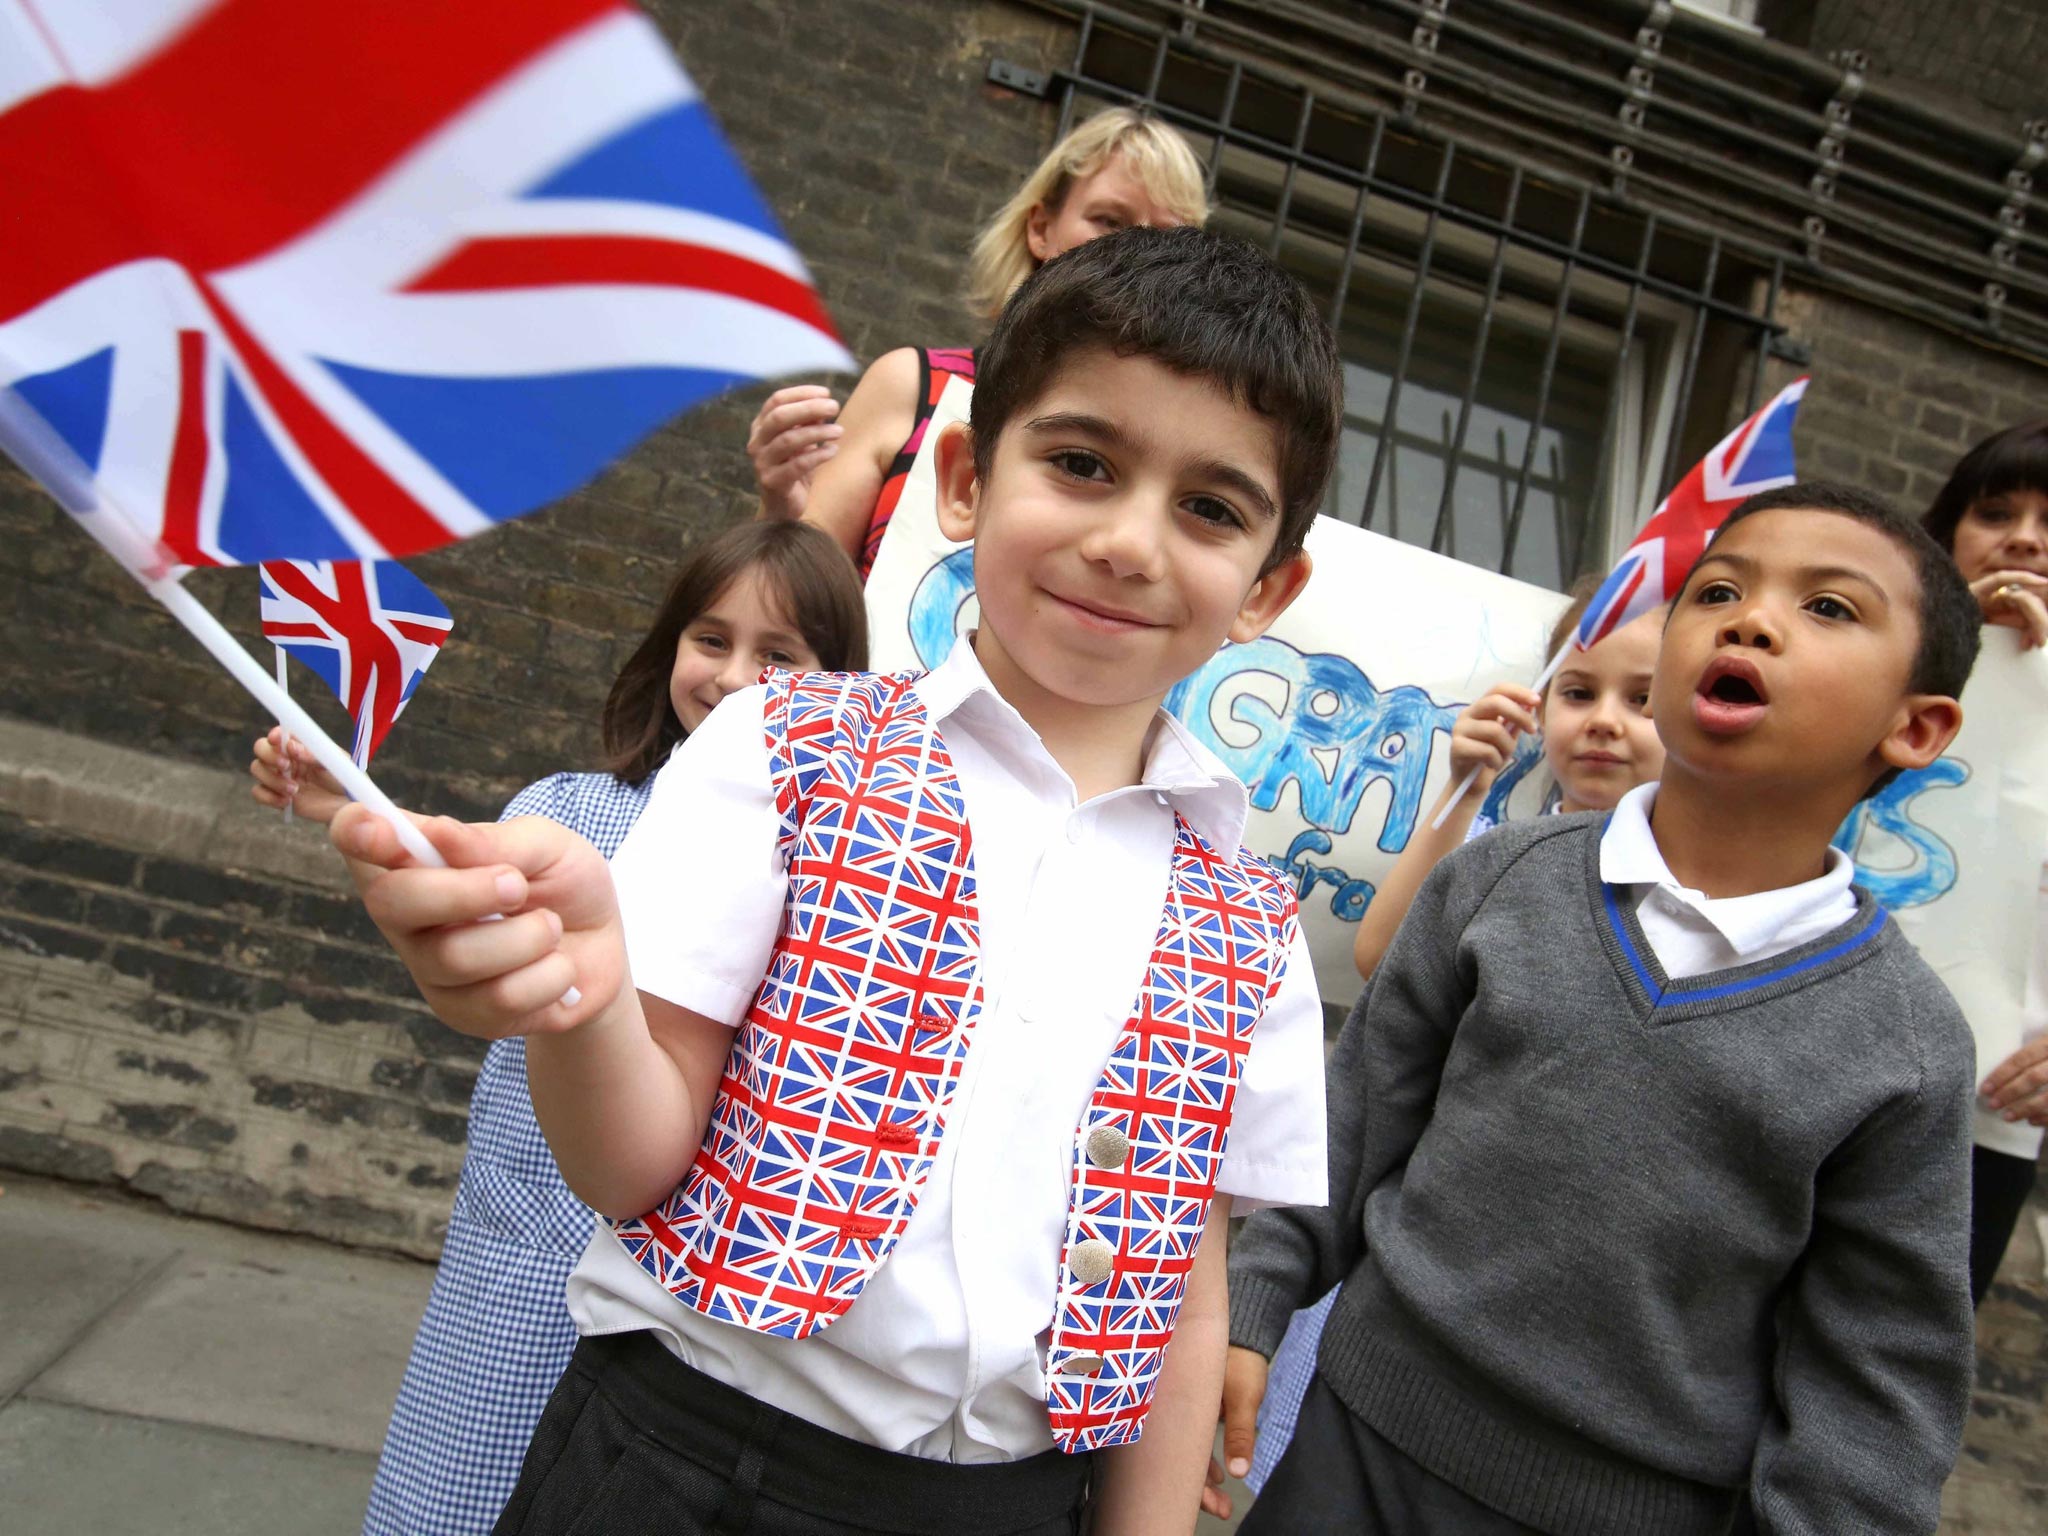 School children wave flags in celebration of the birth of the royal baby outside St. Mary's hospital